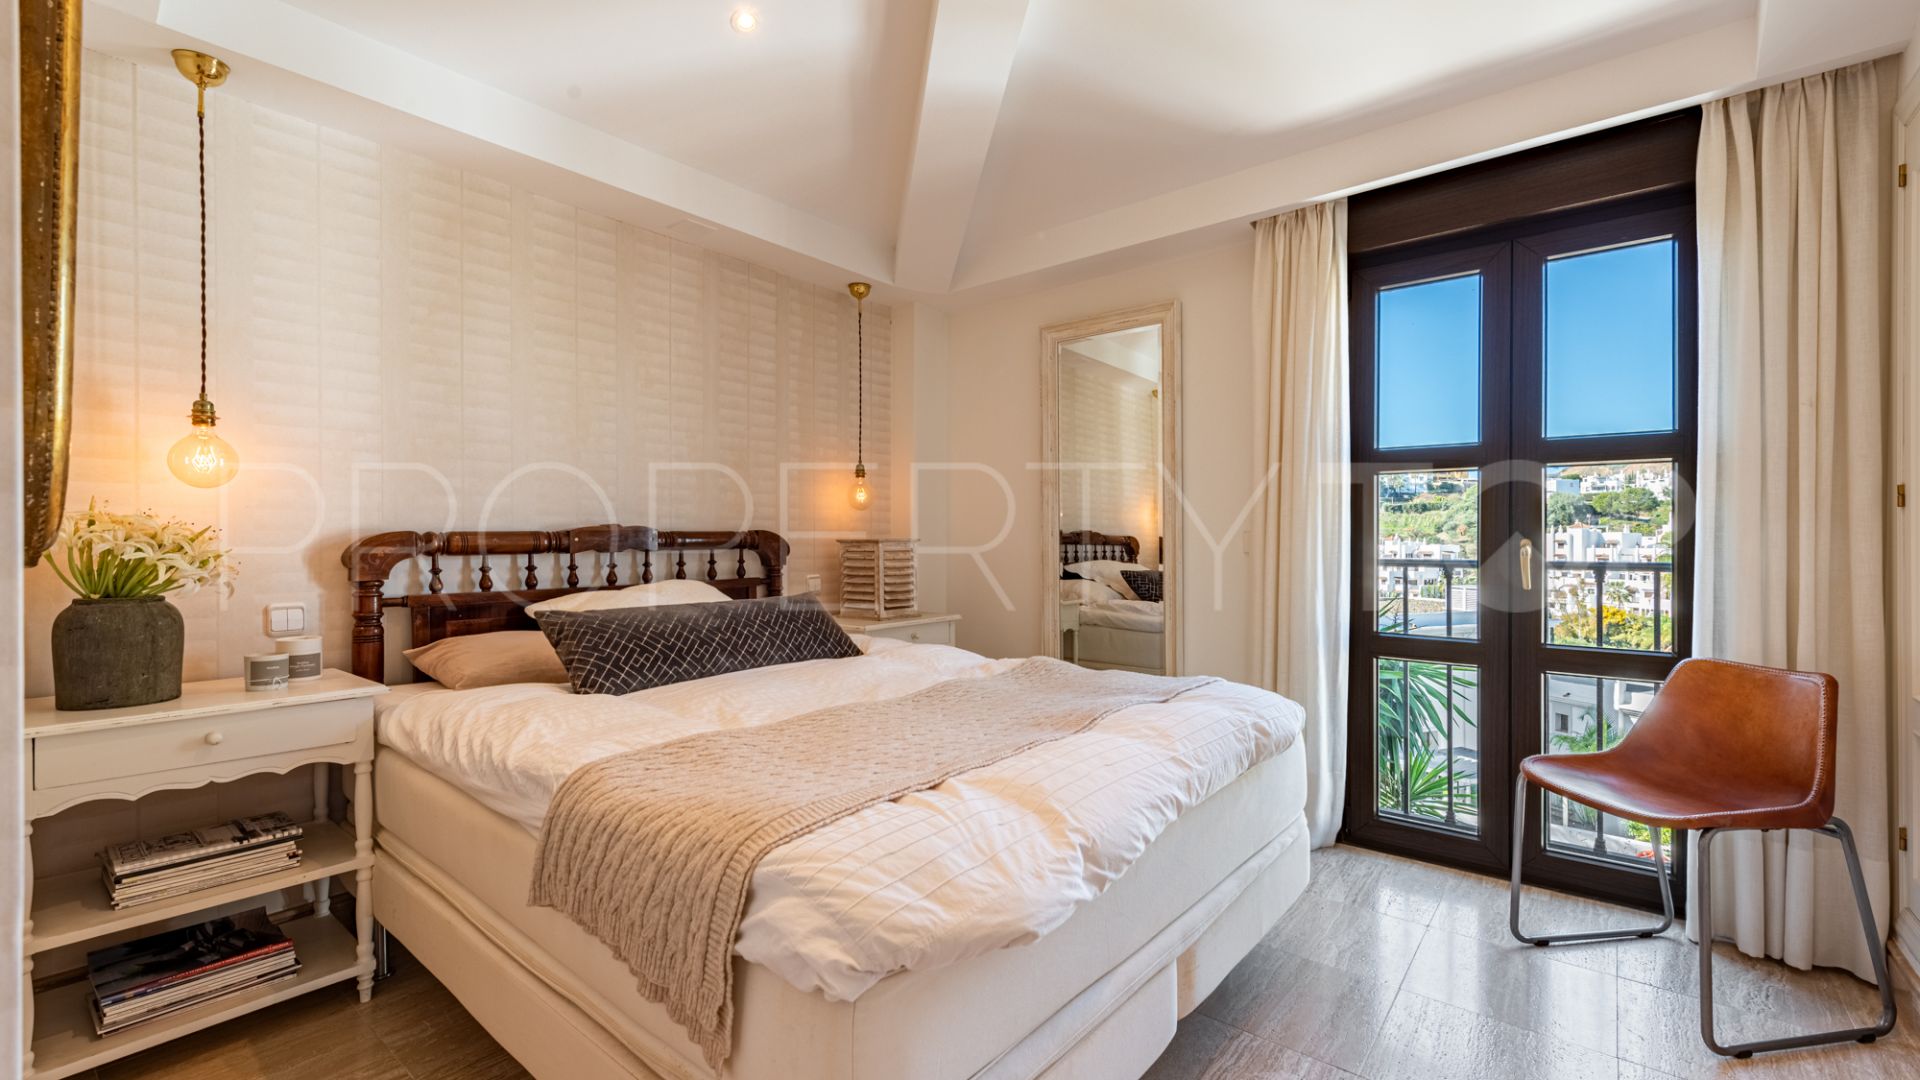 Villa for sale in La Resina Golf with 5 bedrooms